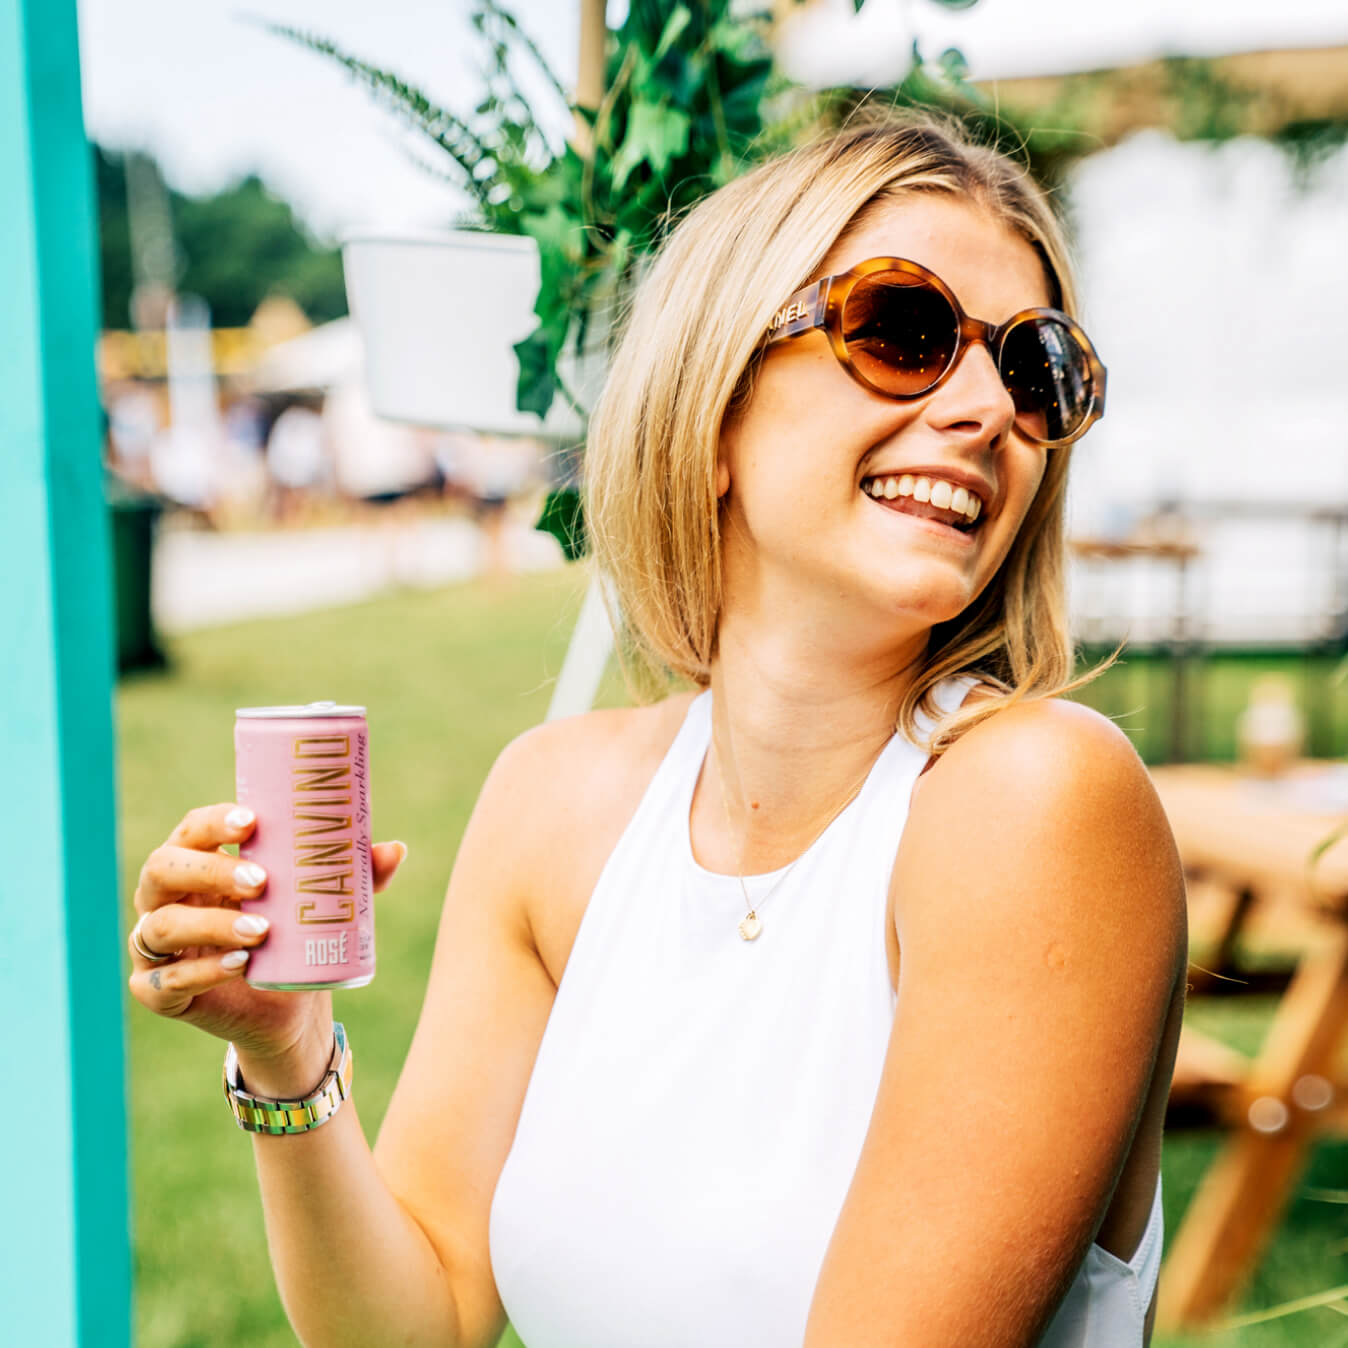 Woman smiling and drinking Canvino at Taste of London